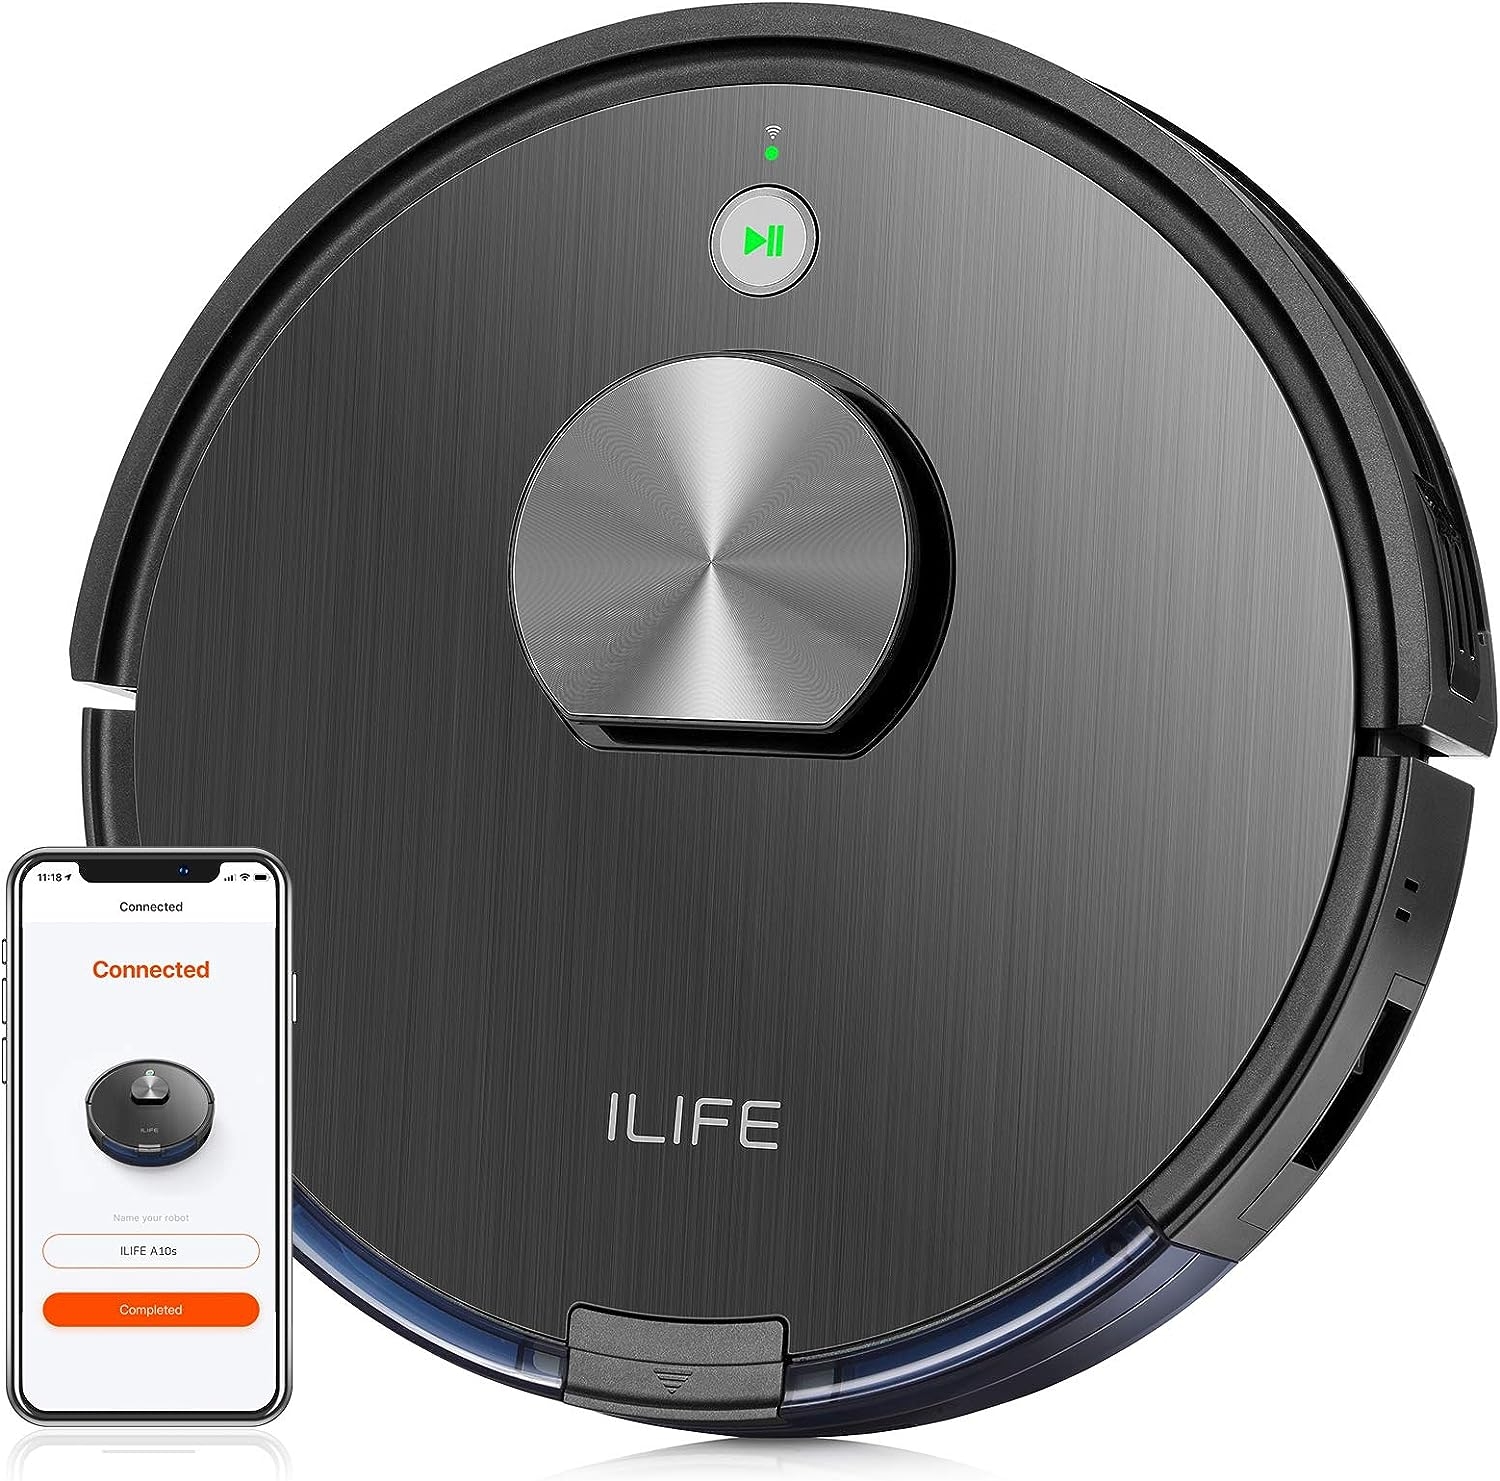 ILIFE A4s Pro Robot Vacuum Cleaner, 2000Pa Max, ElectroWall, Quiet, Automatic Self-Charging Robotic Vacuum Cleaner, Cleans Hard